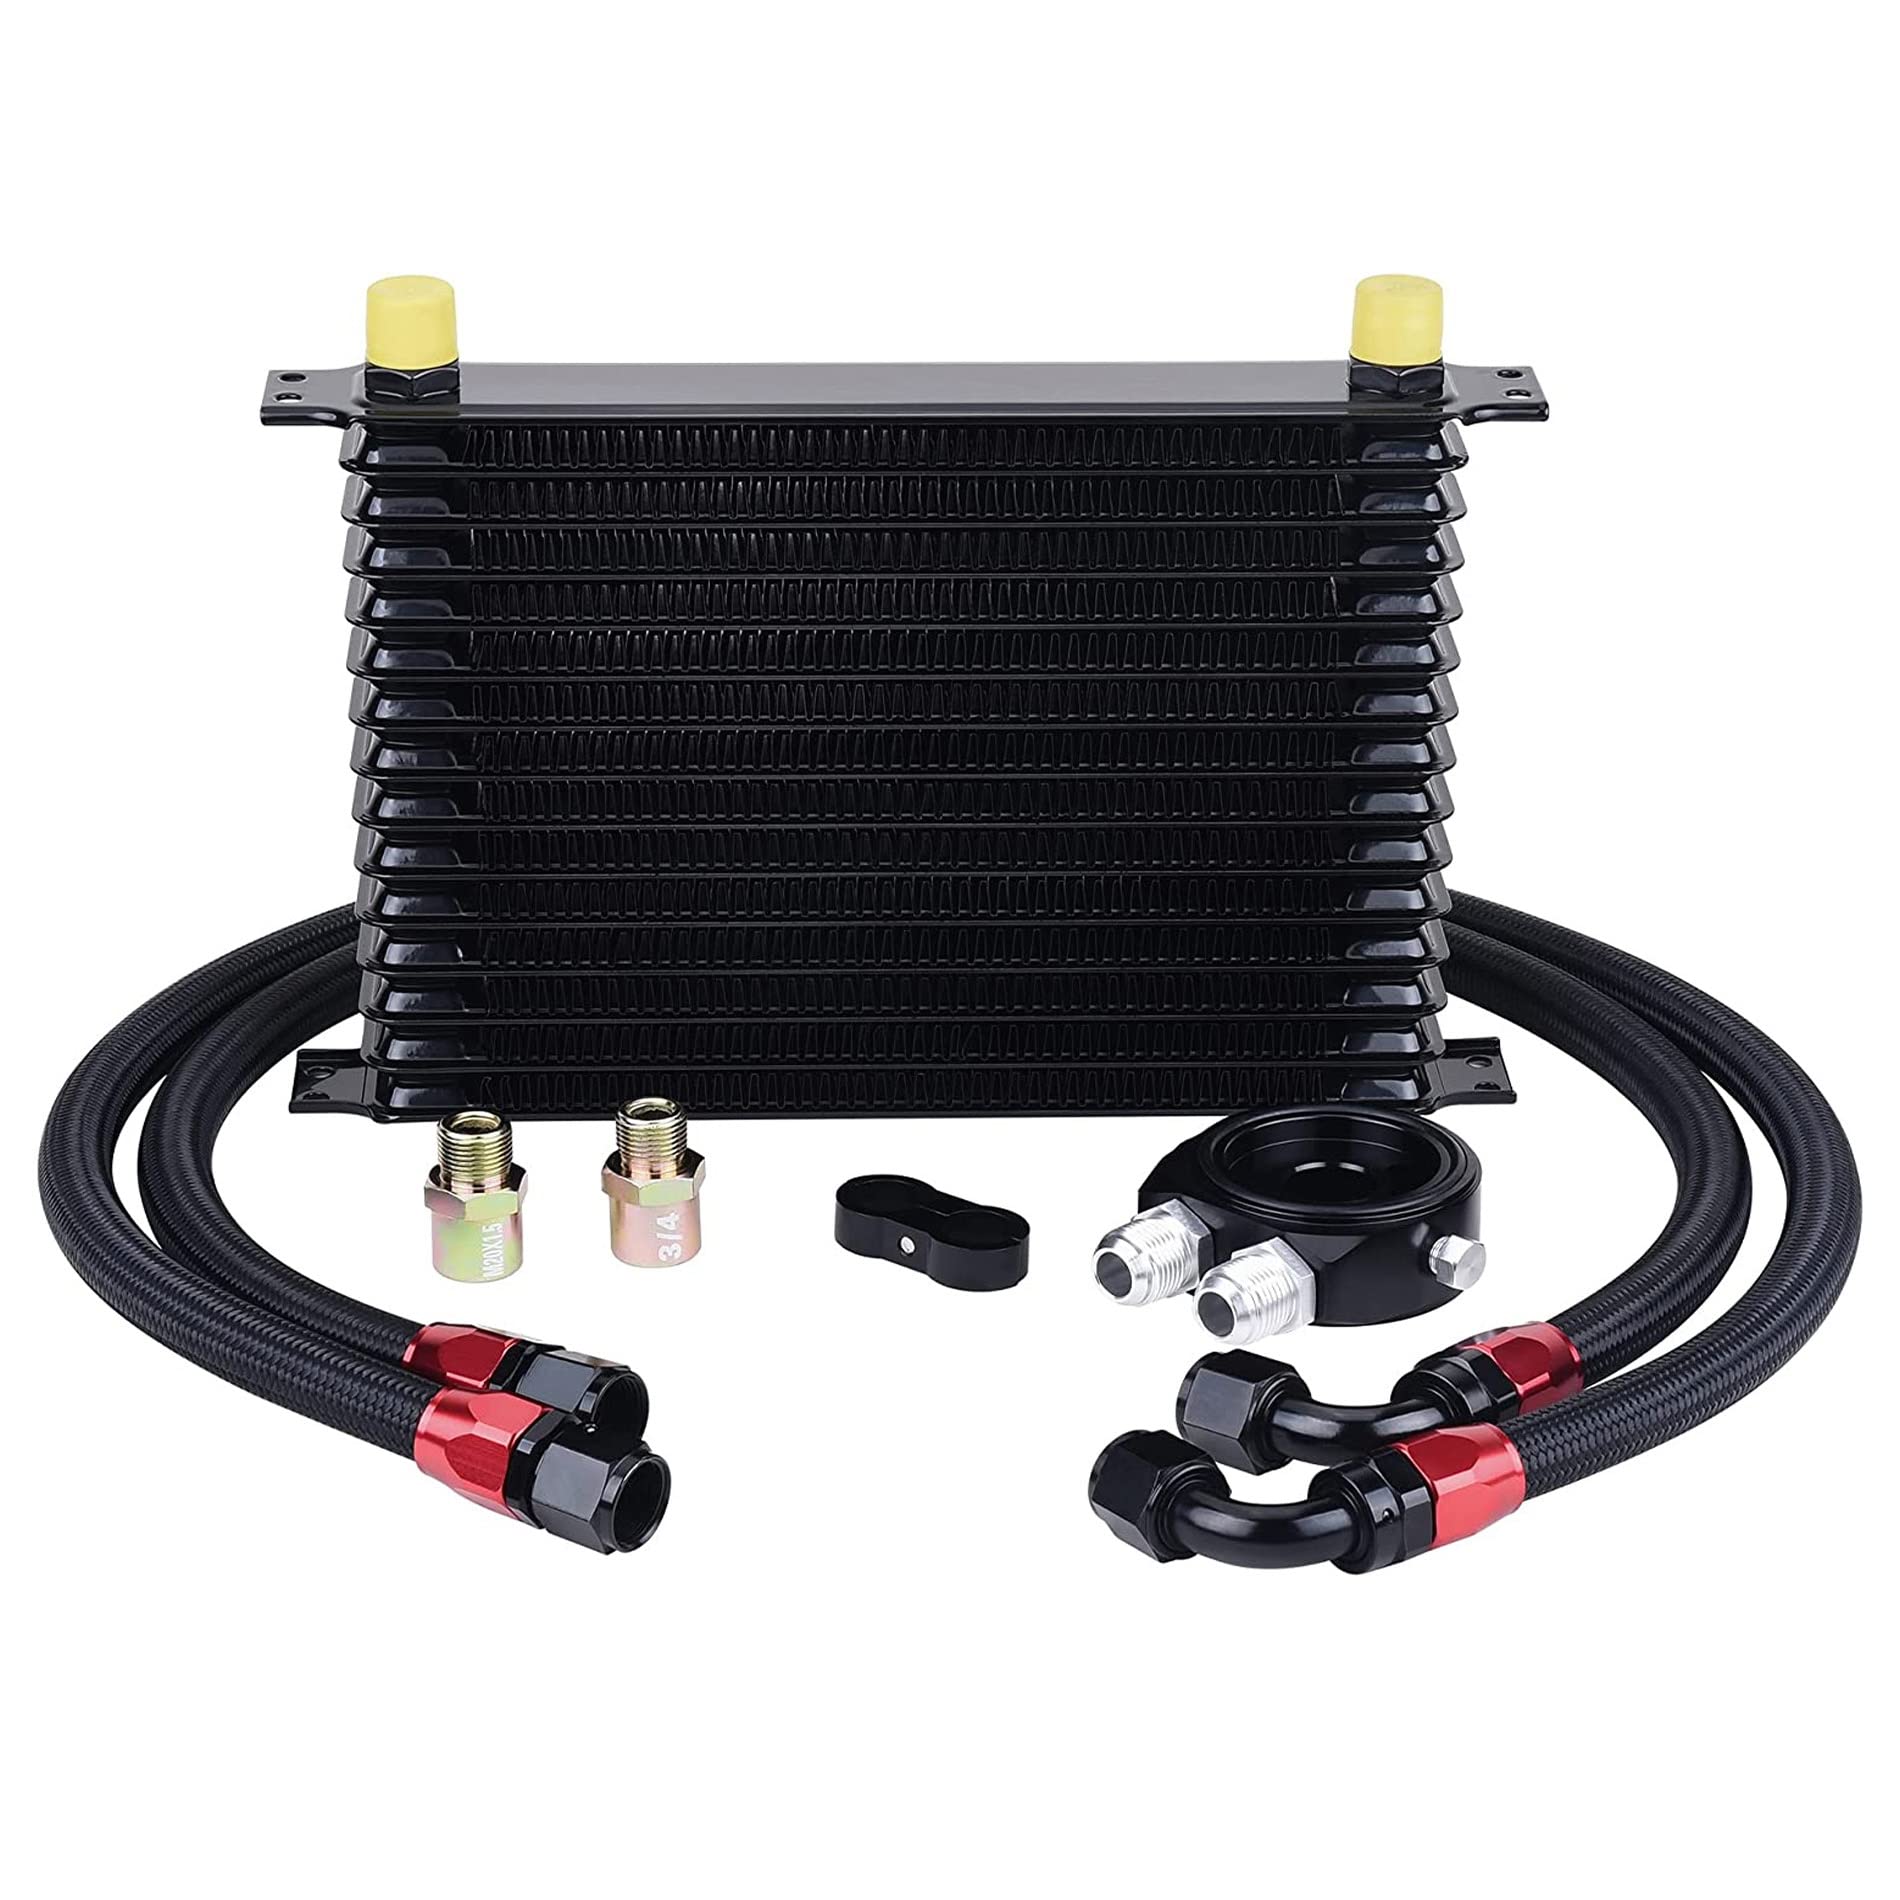 Engine Oil Cooler: Installation, Replacement & Benefits